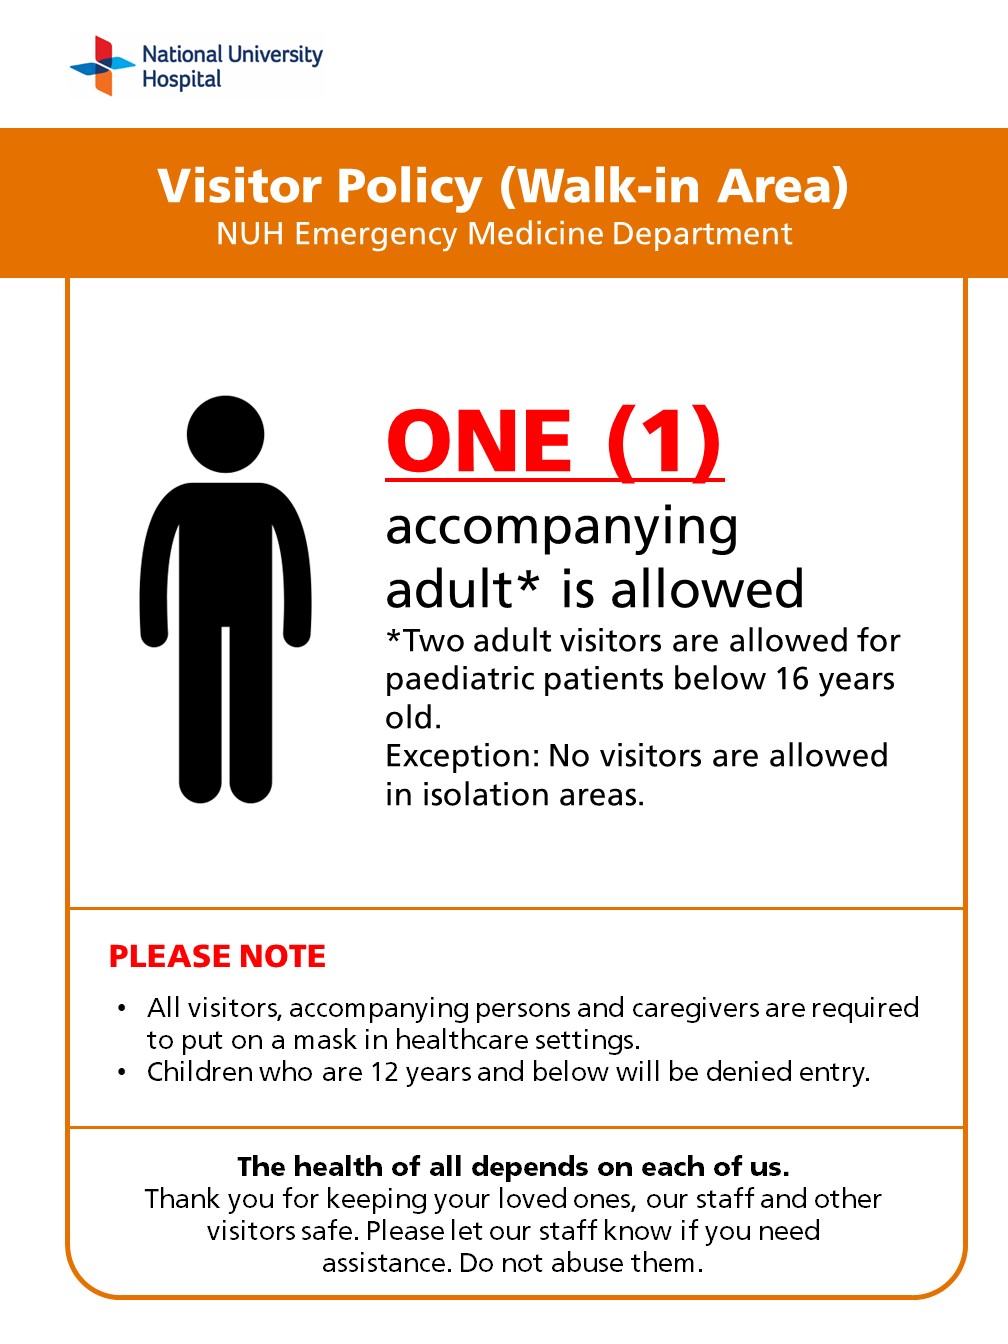 Visitor Policy and Registration